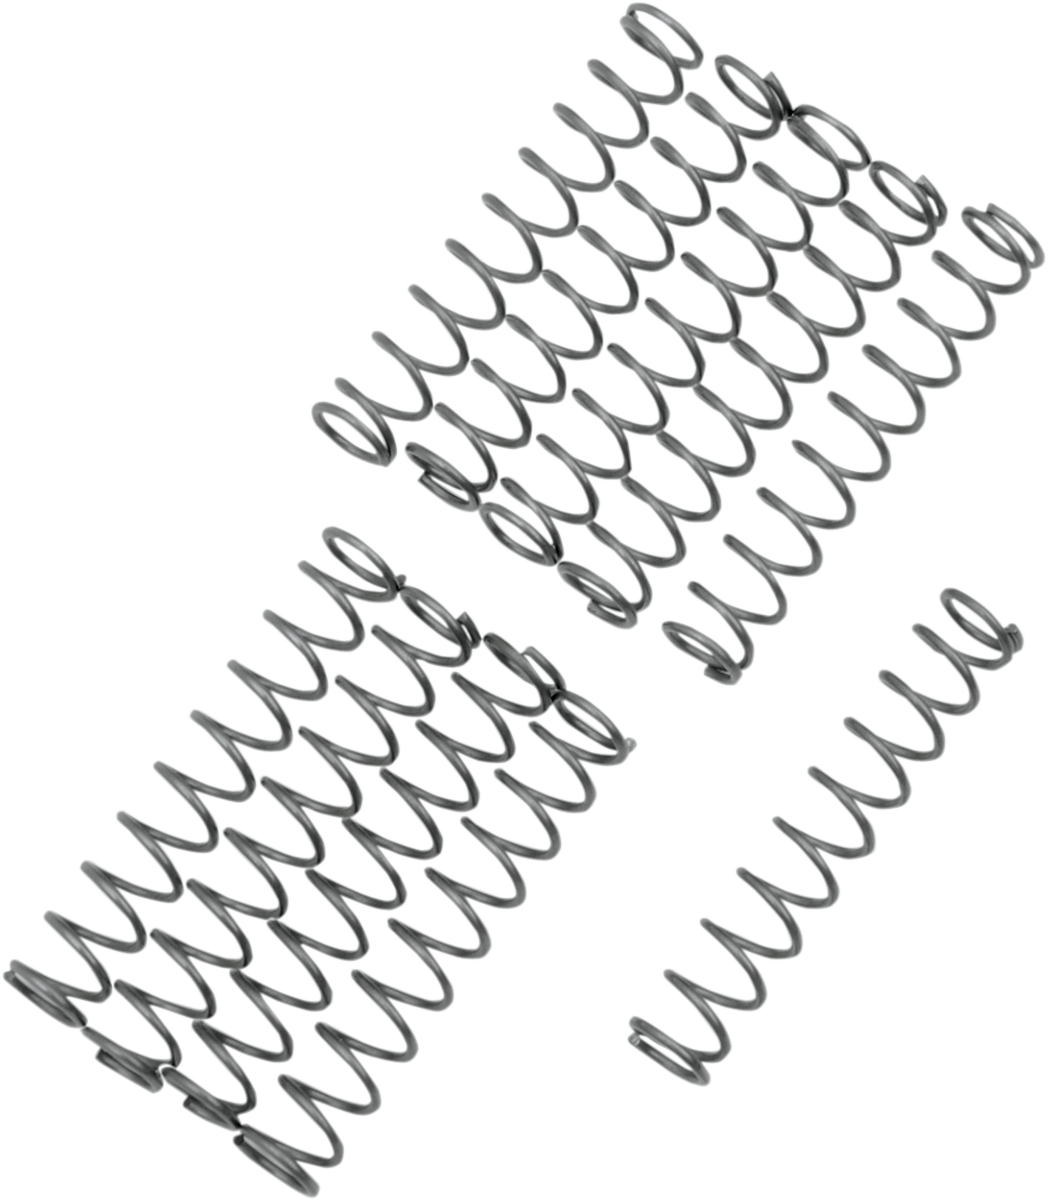 EASTERN MOTORCYCLE PARTS Relief Valve Spring - Big Twin A-26210-99